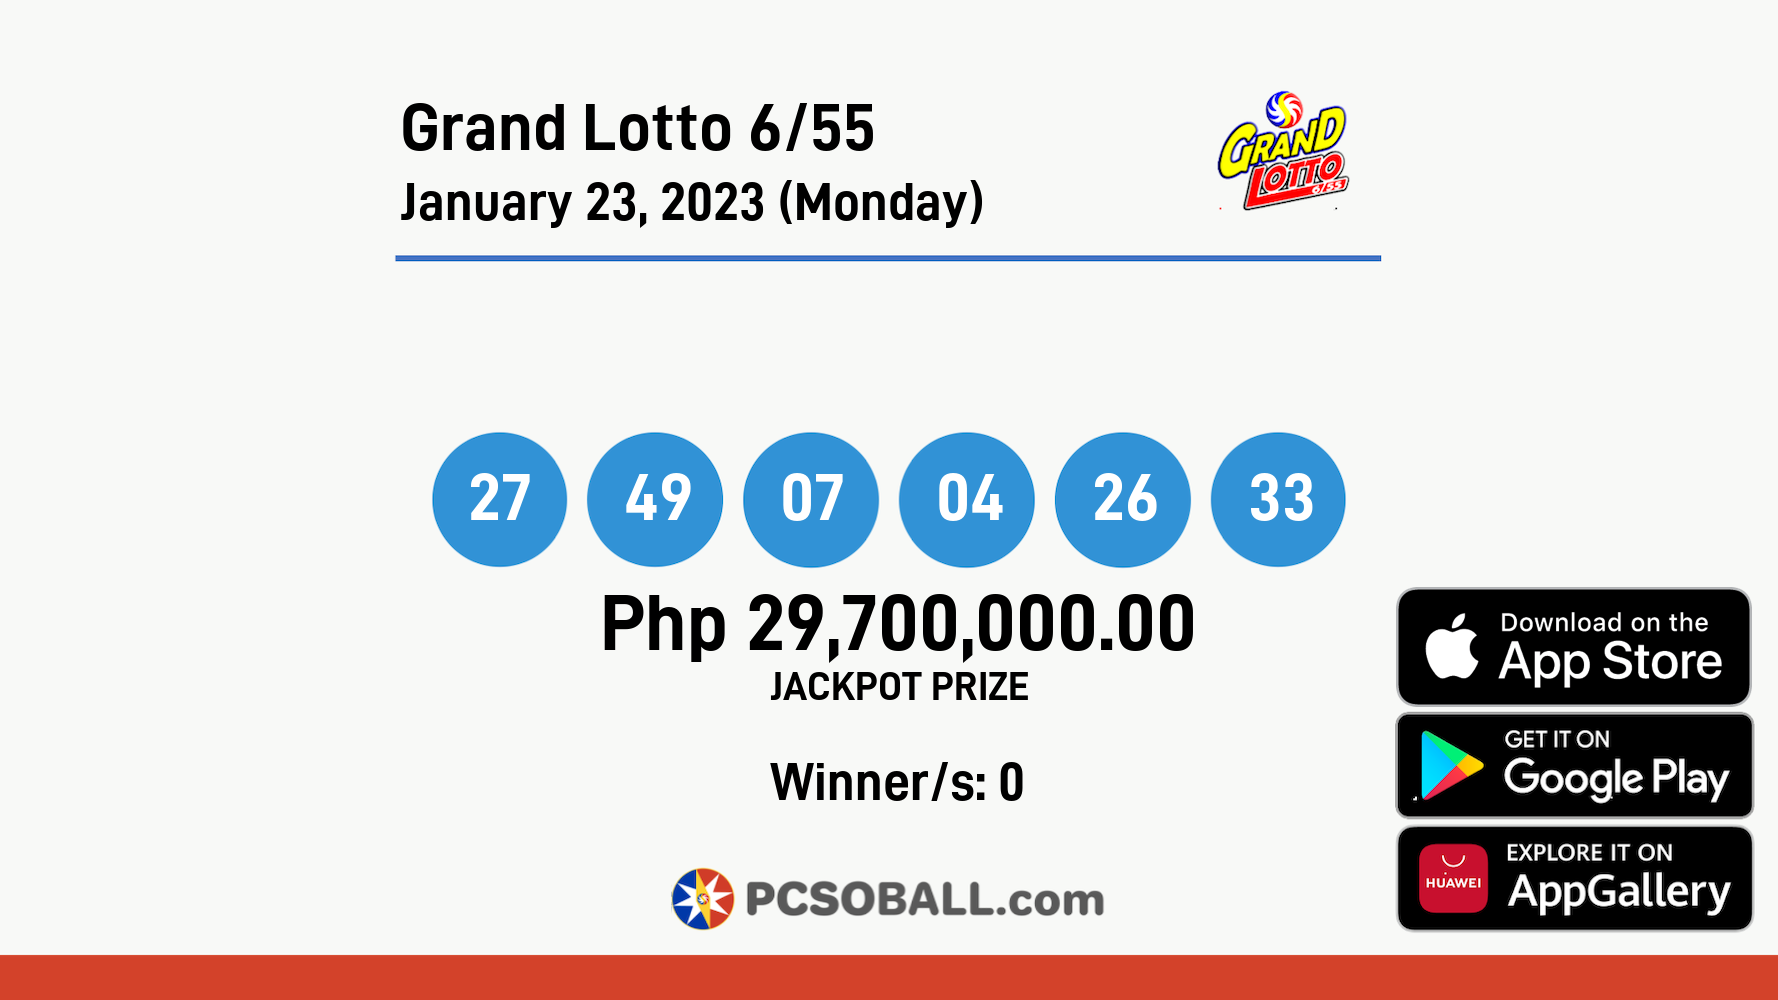 Grand Lotto 6/55 January 23, 2023 (Monday) Result